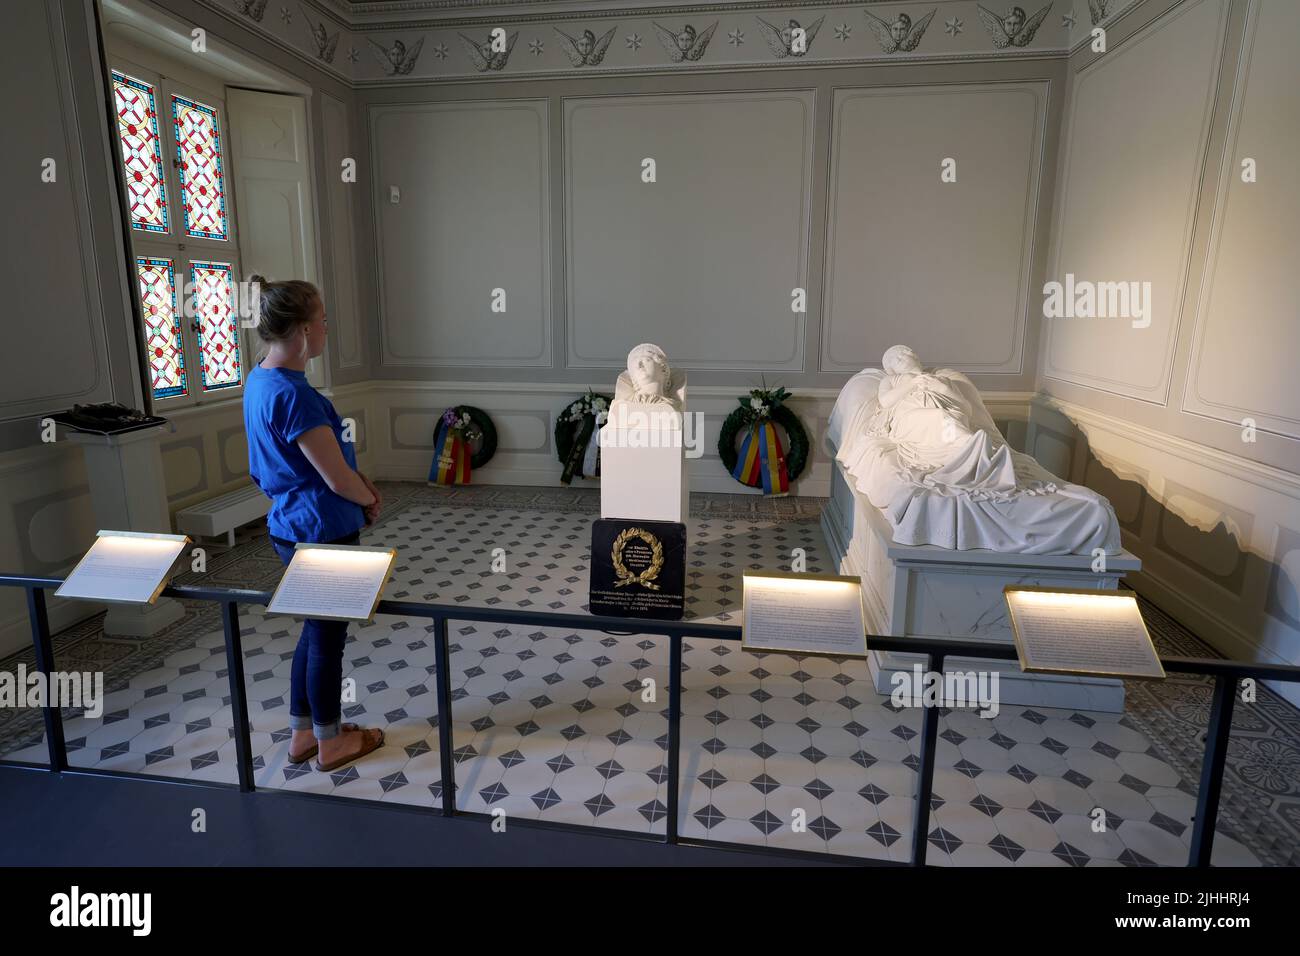 12 July 2022, Mecklenburg-Western Pomerania, Hohenzieritz: Christine Henning, Museum Education, is standing in the death chamber of Queen Luise of Prussia (1776 -1810) in the palace next to the 'Bust Segment of the Tomb Figure of Queen Luise' (c. 1820 - 1830) by Christian Daniel Rauch. On the right lies the 'Grave Figure of Queen Luise of Prussia' (plaster cast of the Neustrelitz marble copy). The original bust has now been returned to the memorial. The bust is to be presented in Hohenzieritz on 'Luise Day' (19.07.2022) on the occasion of the 212th anniversary of the death of the once beloved Stock Photo